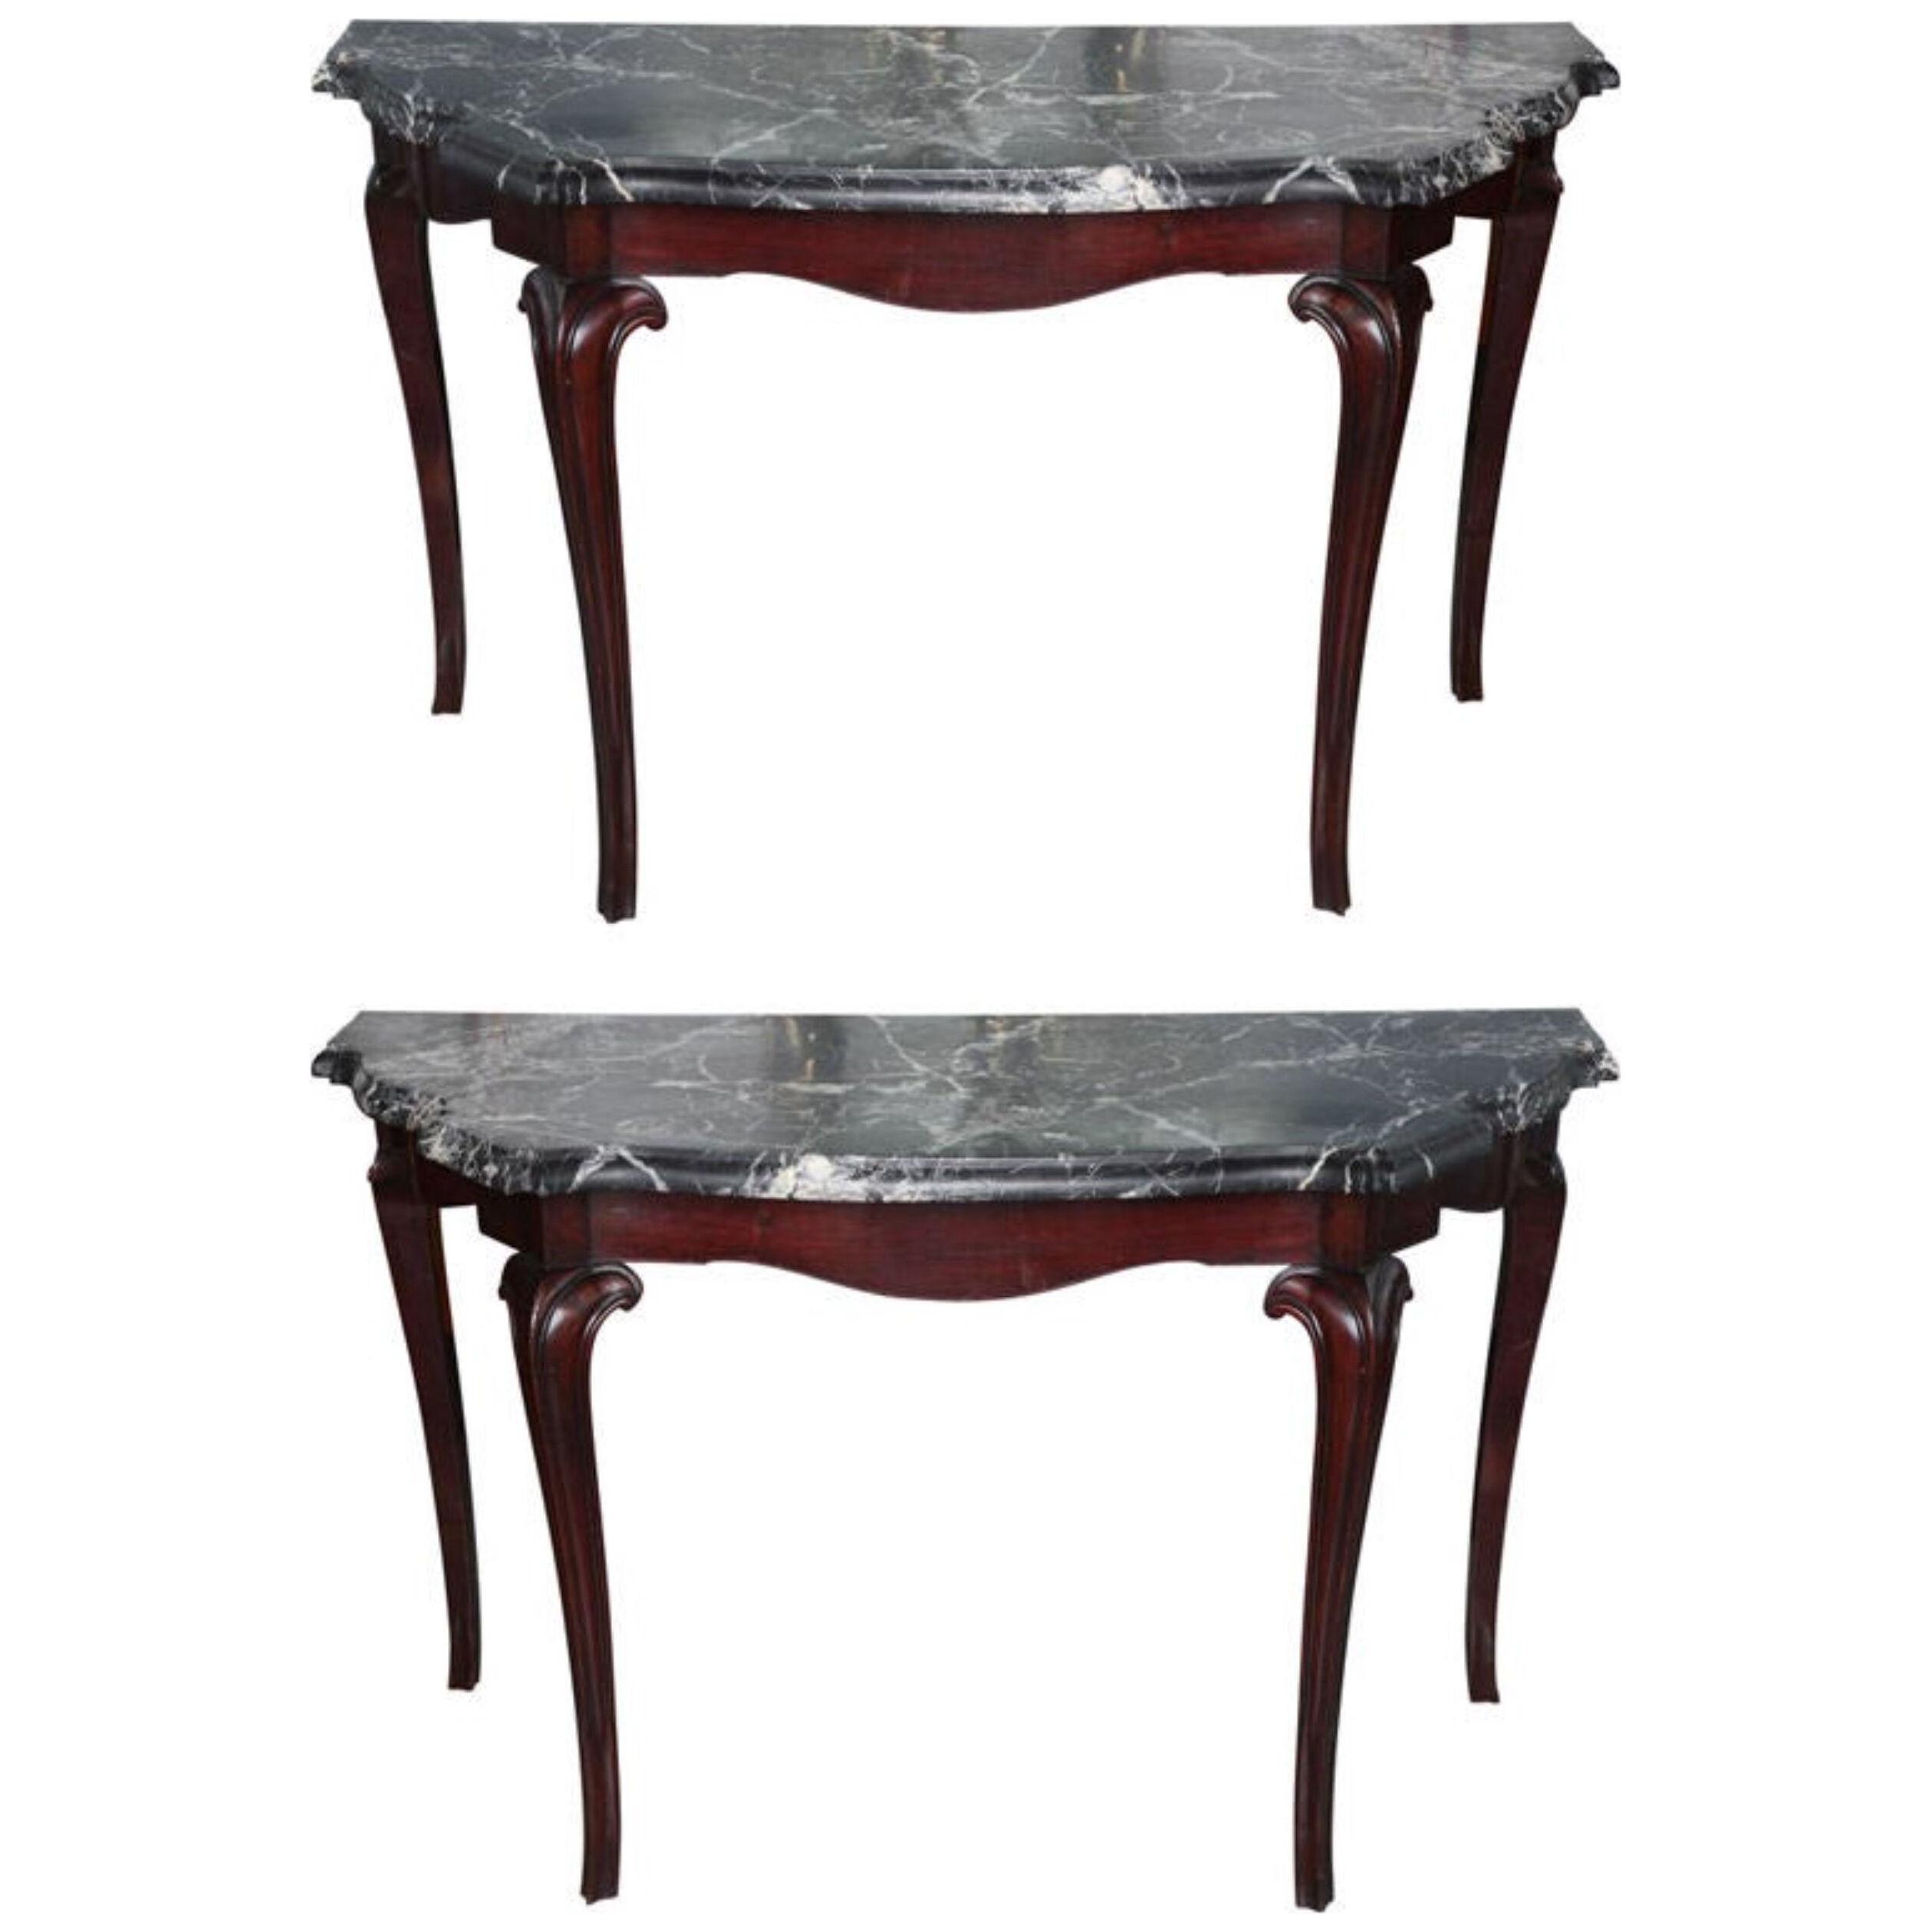 Fine Pair of Portuguese Rococo Rosewood and Marble Consoles